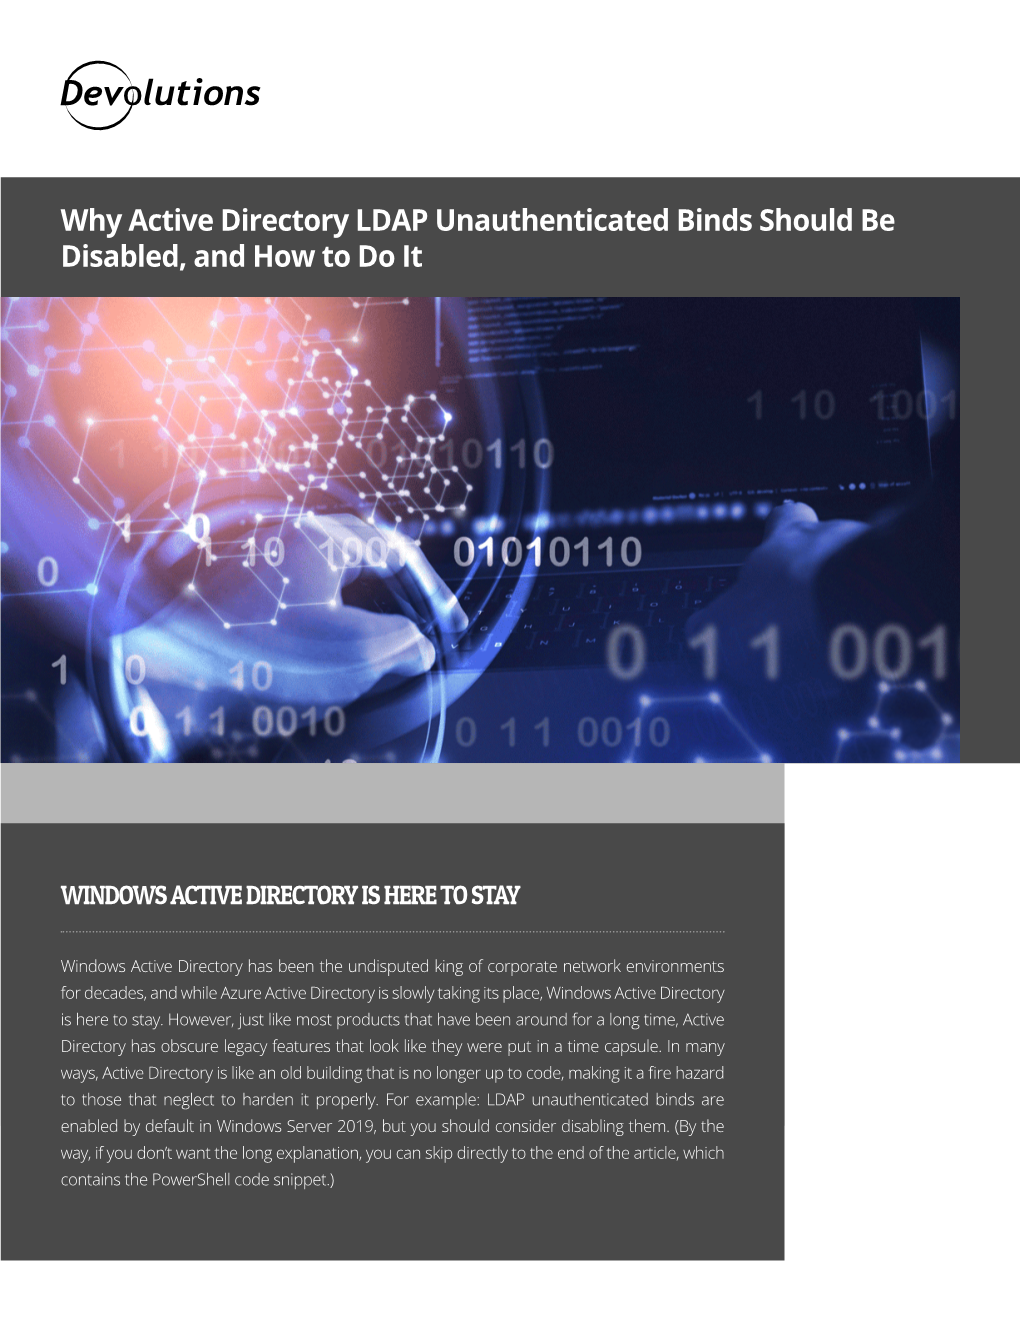 Why Active Directory LDAP Unauthenticated Binds Should Be Disabled, and How to Do It